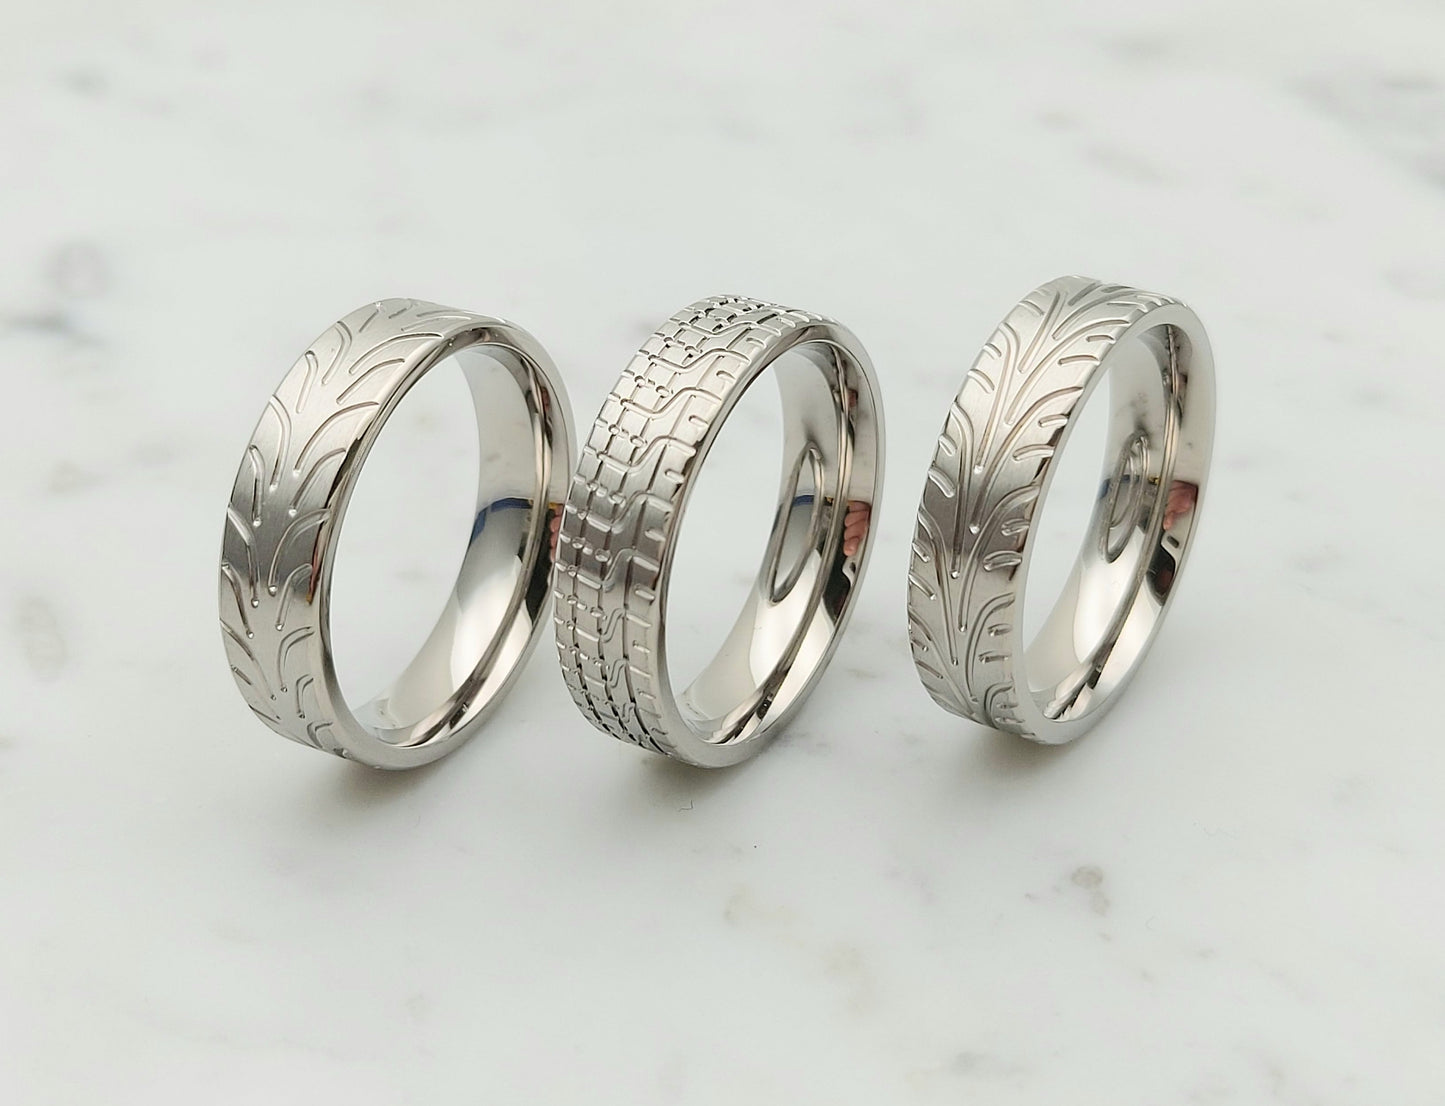 6mm Tire tread ring in pure Titanium - Wedding ring band for men and women